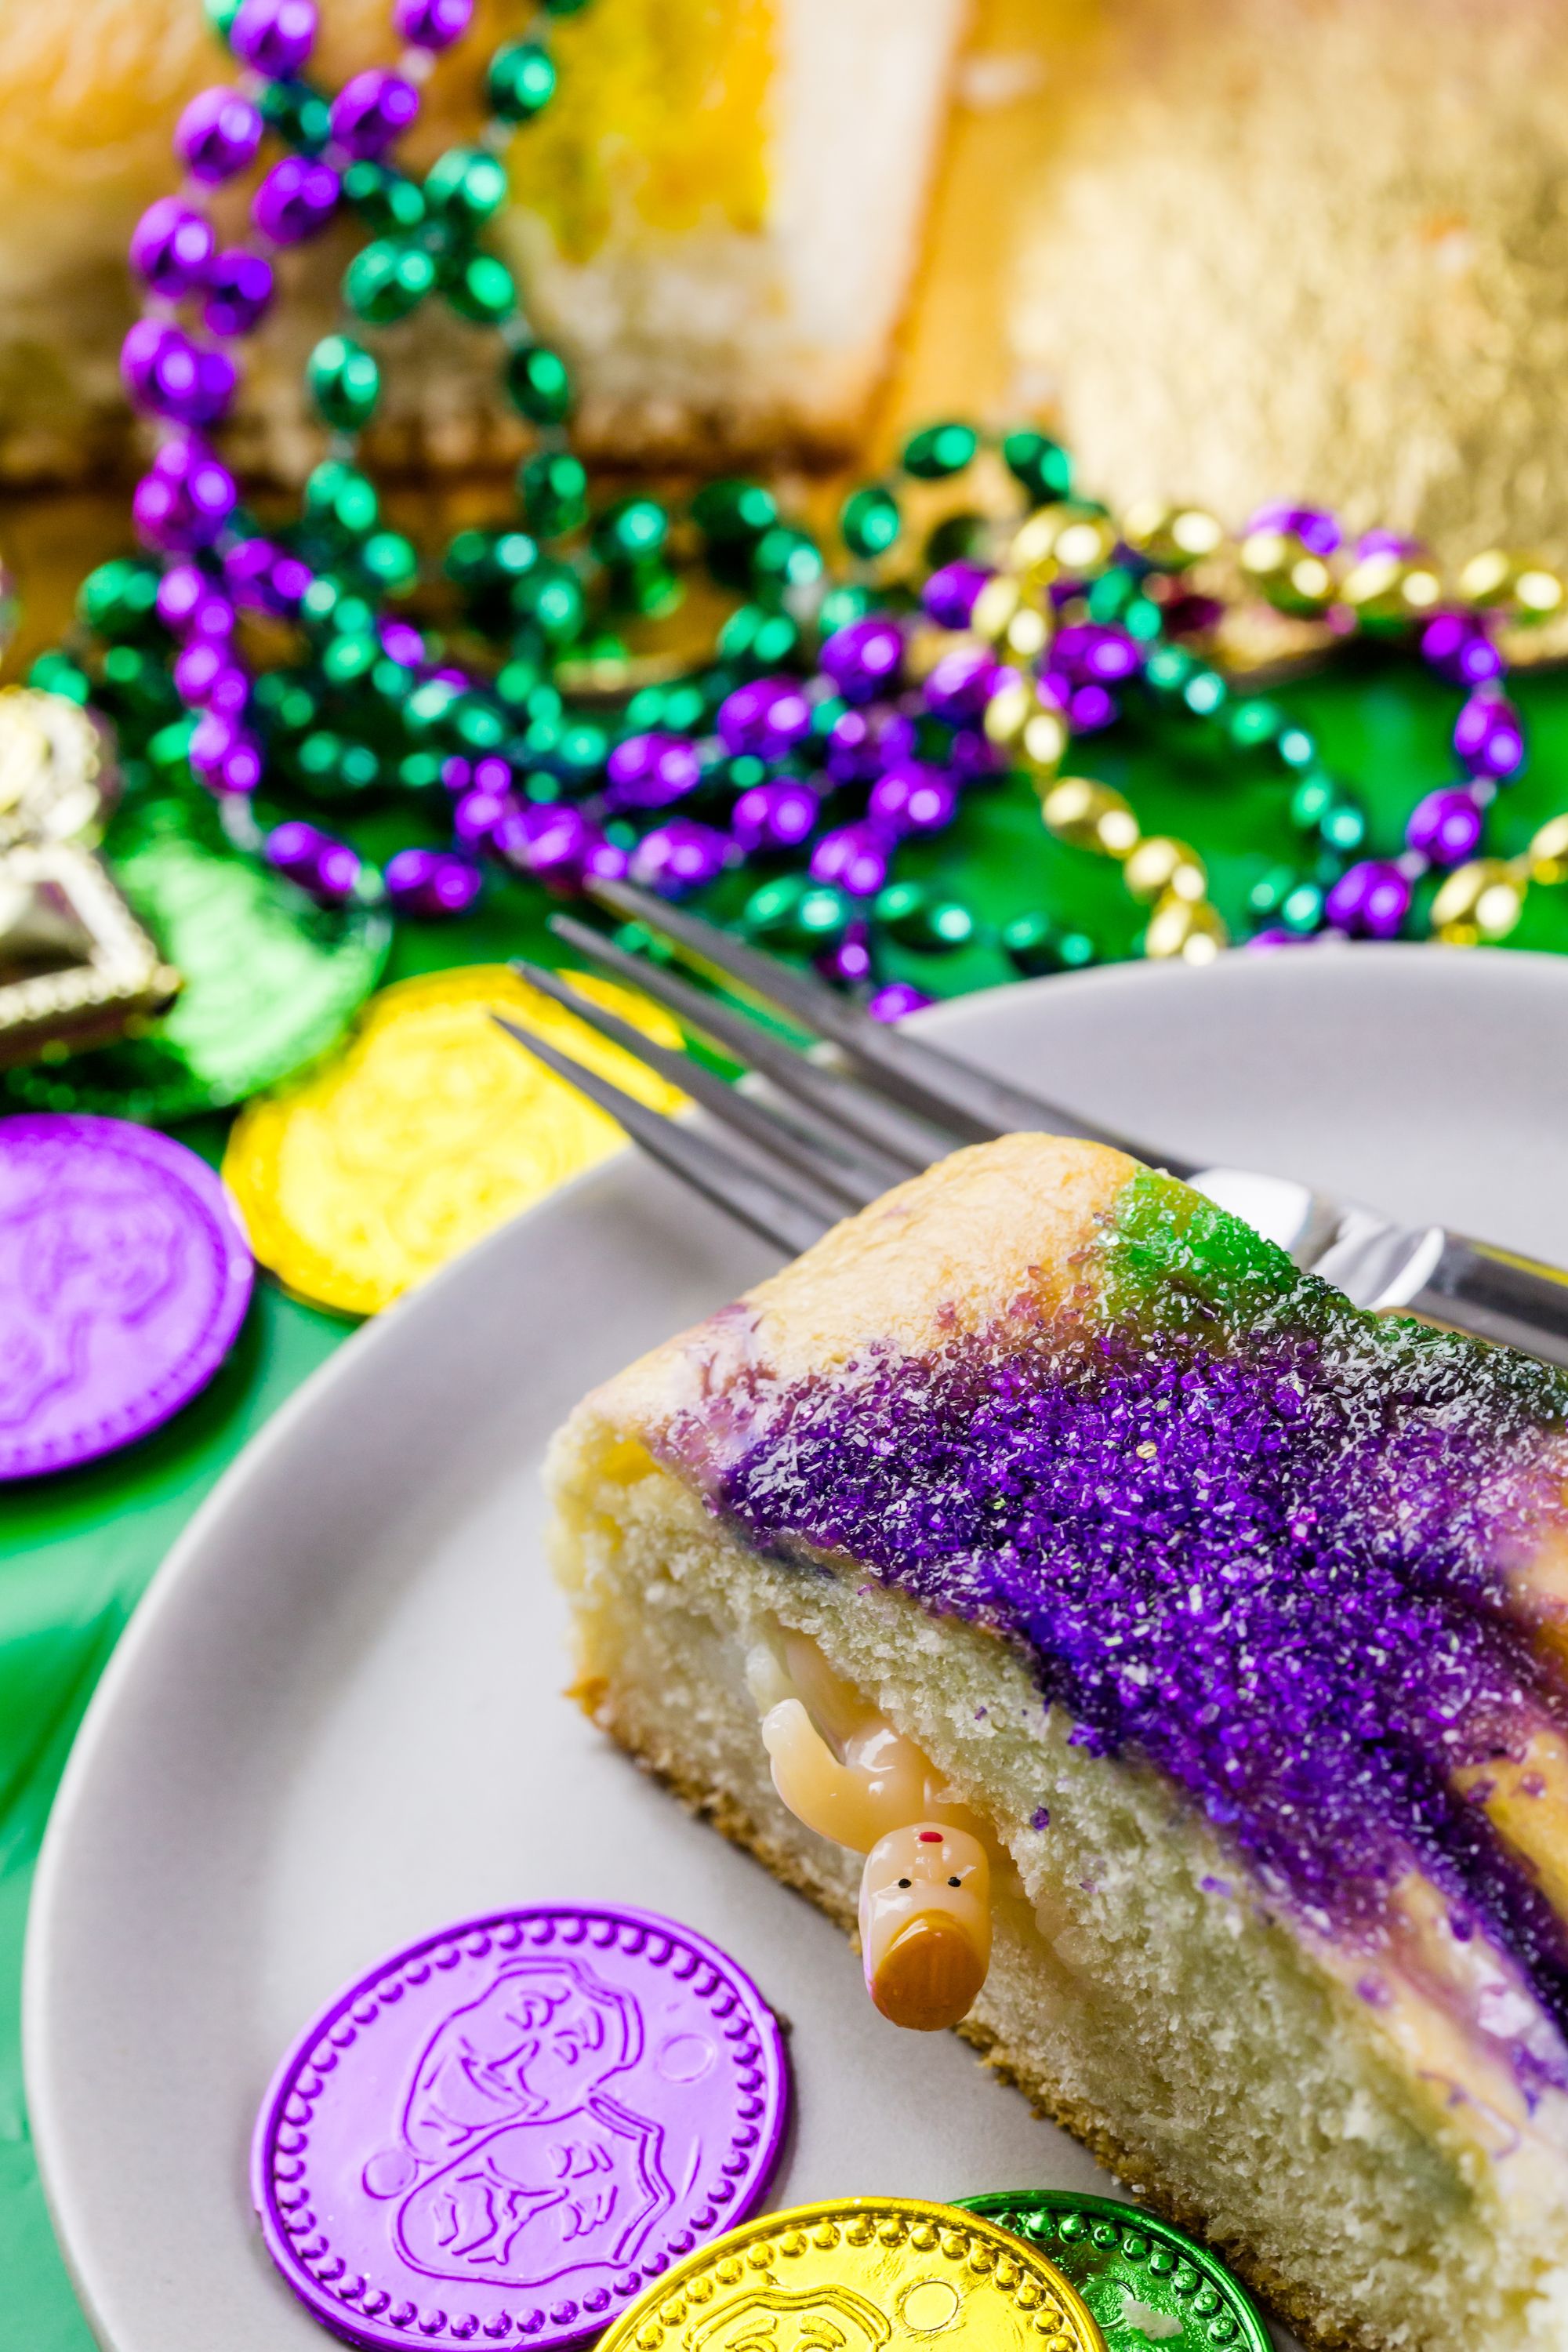 How the King Cake Tradition Began—and Why There's a Plastic Baby